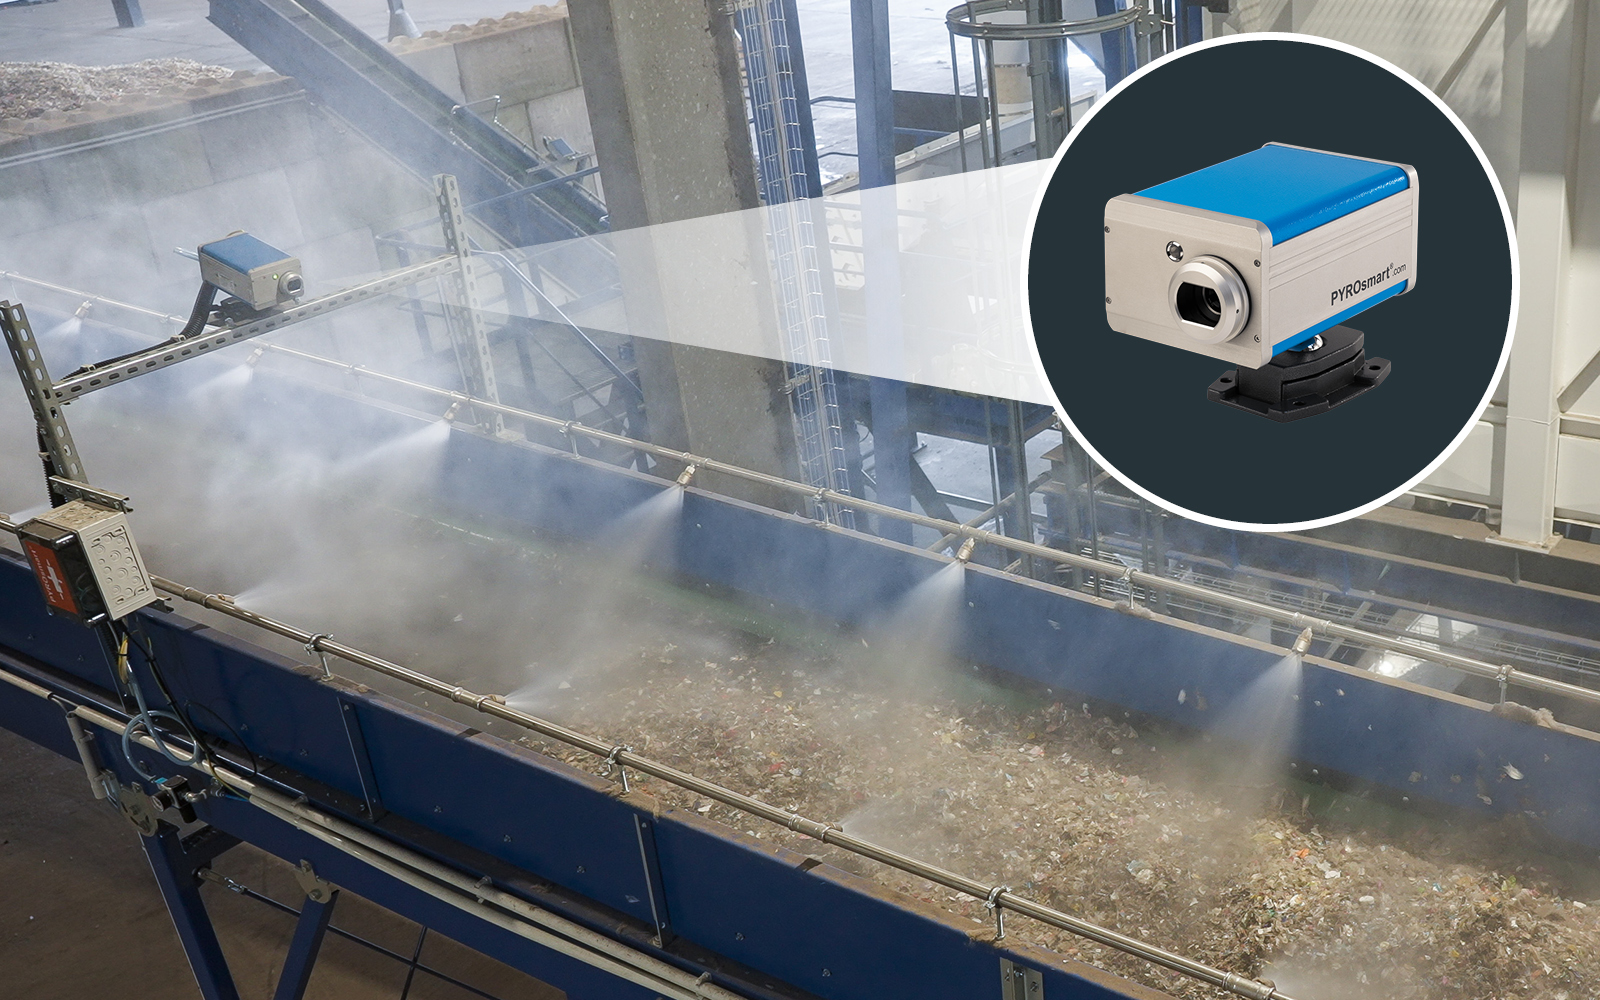 PYROsmart® NS monitors belt transfer points and triggers extinguishing using water mist nozzles